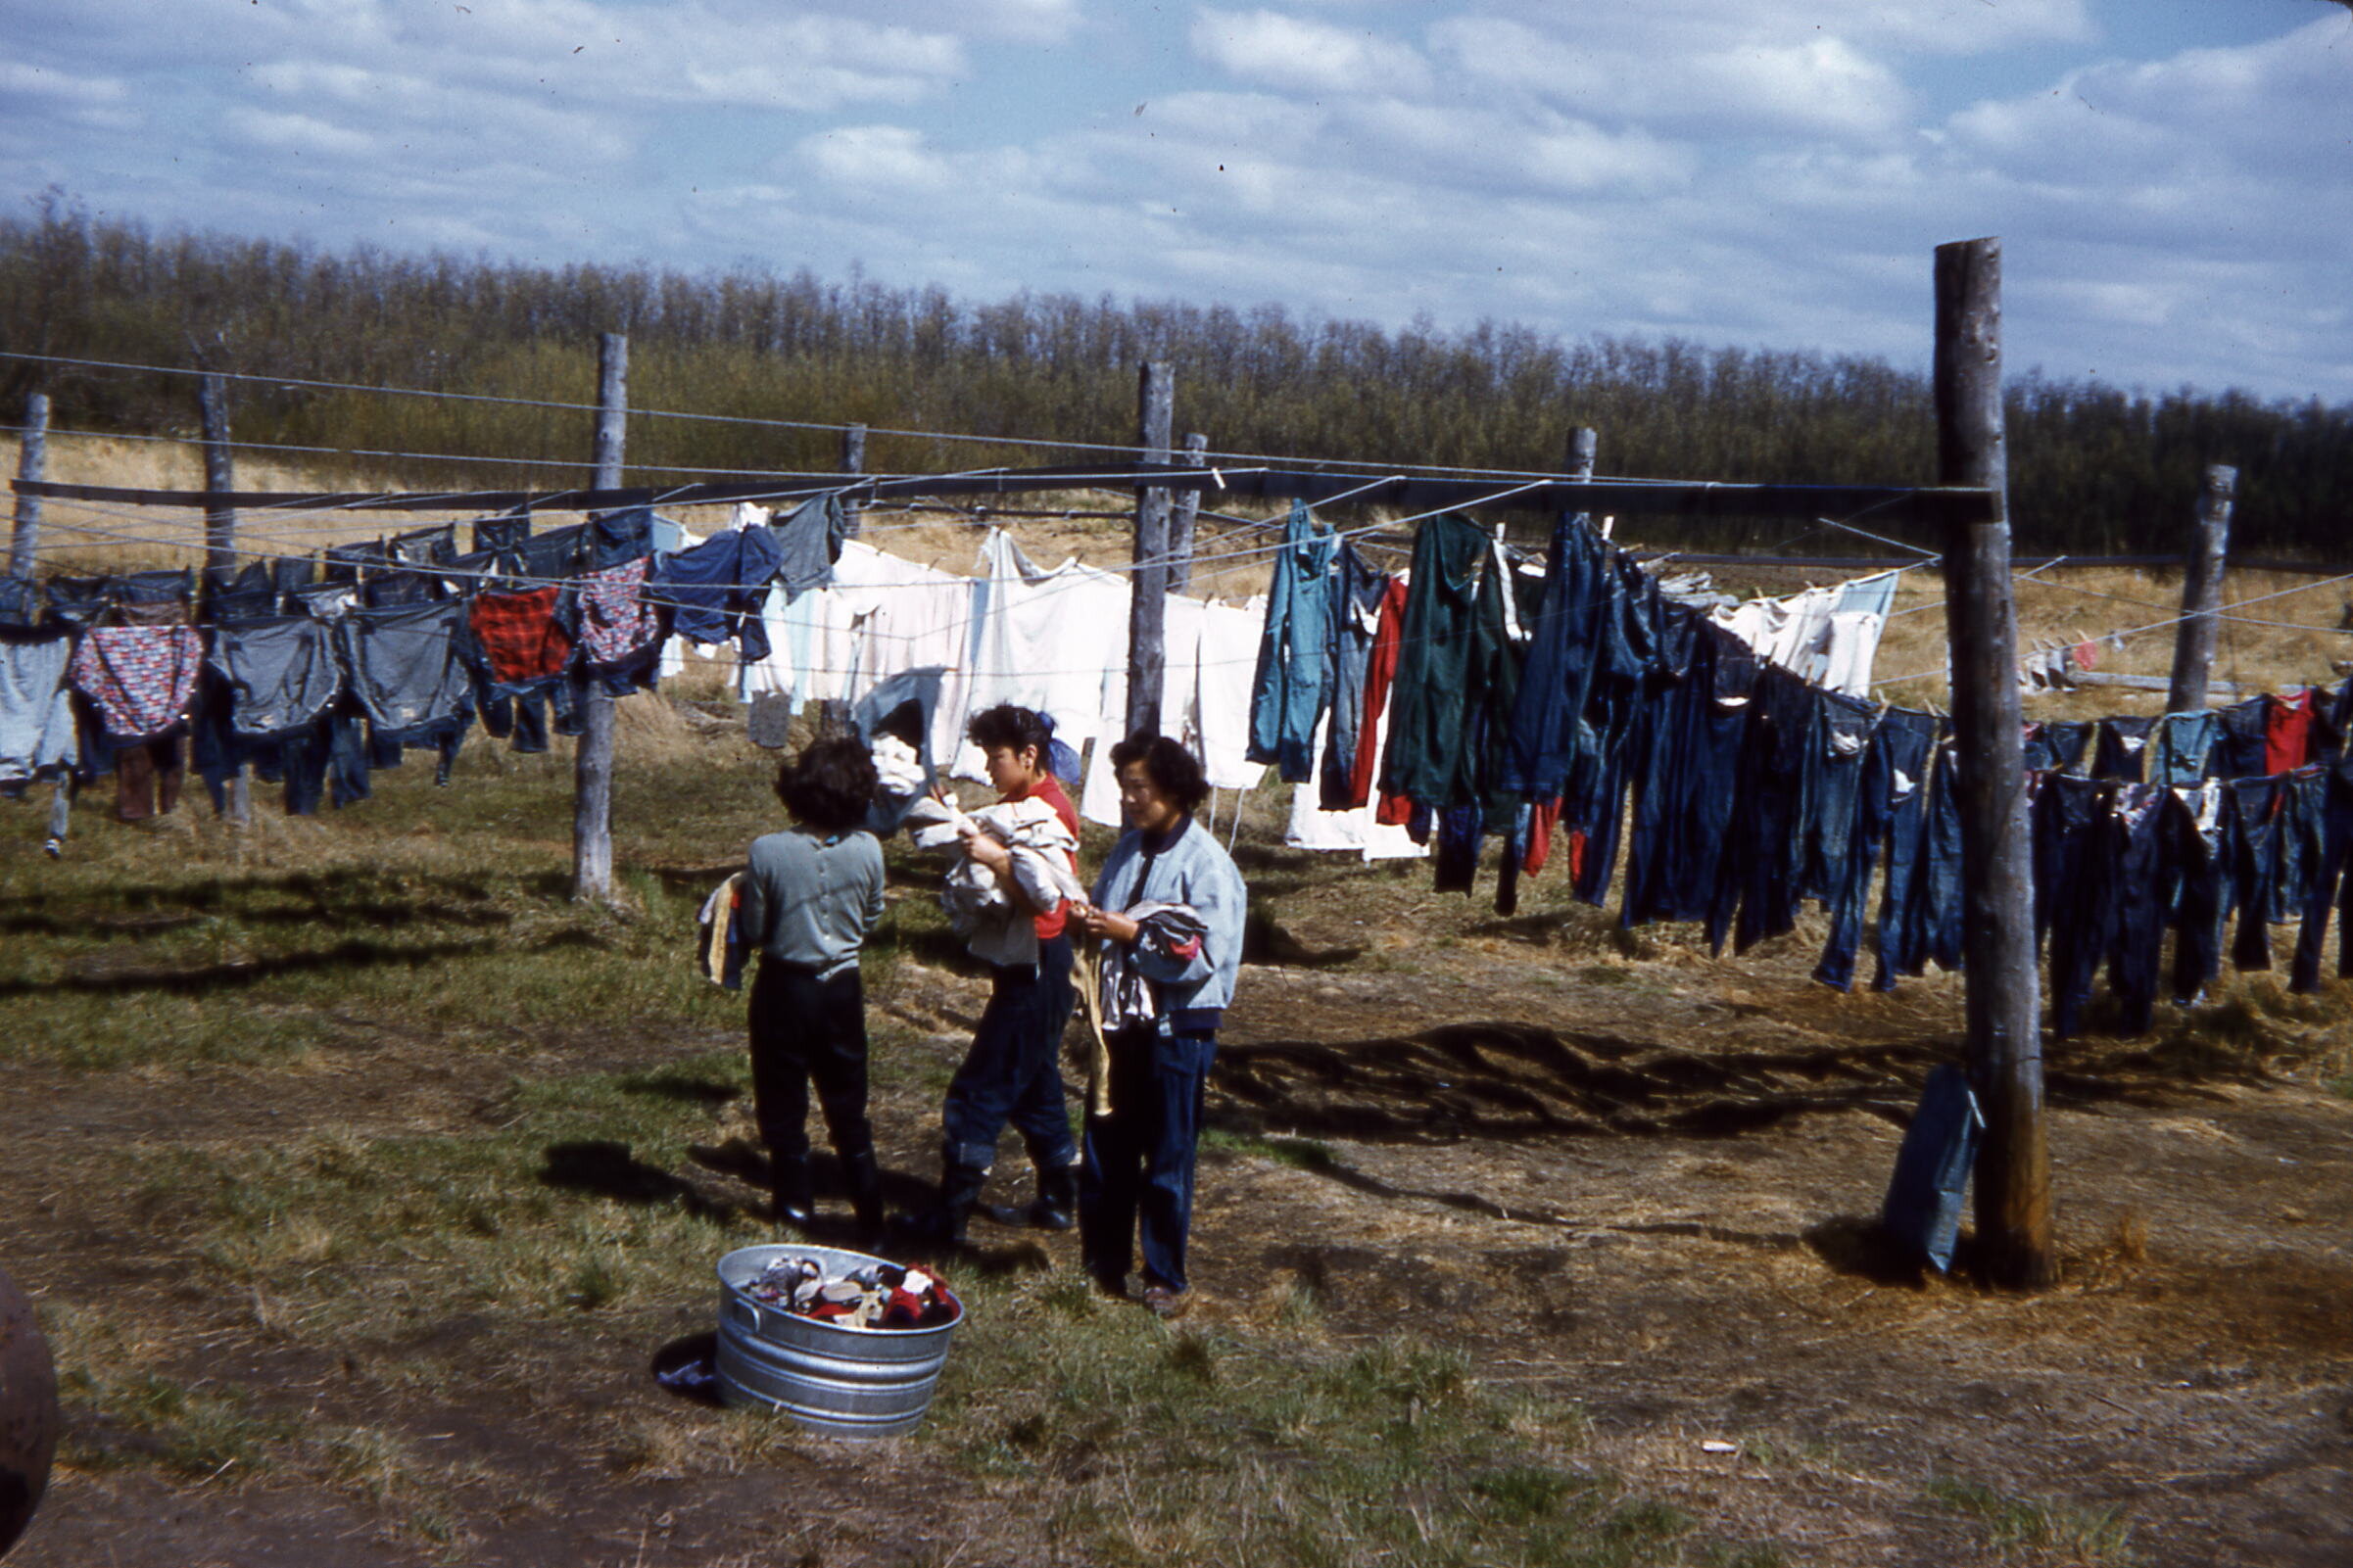 50s - Hanging out the laundry.jpg